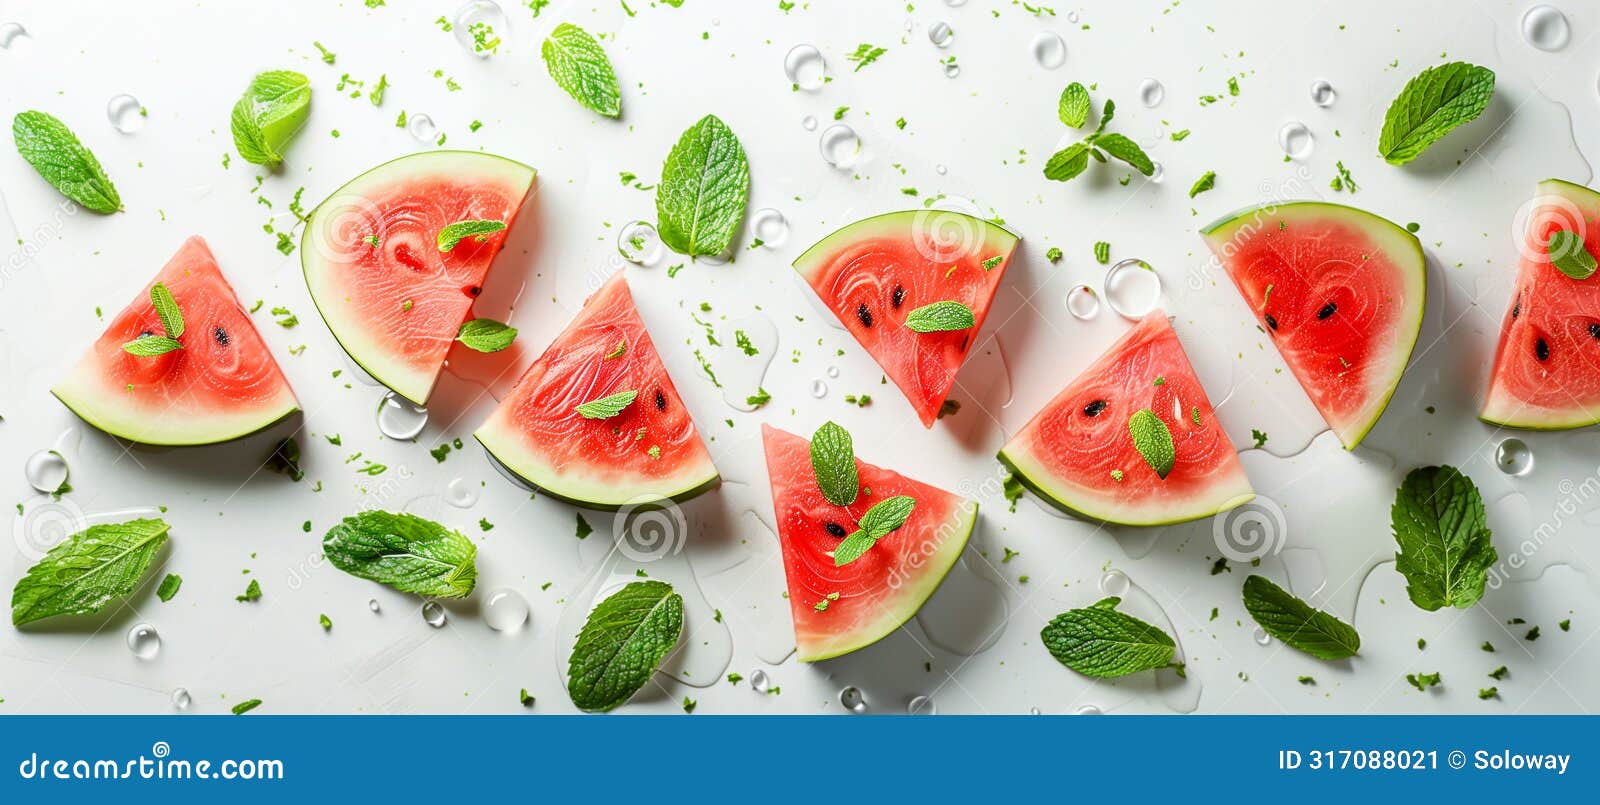 watermelon bliss! luscious pink slices drizzled with mint on a calming blue canvas. a burst of summer flavor for any occasion.